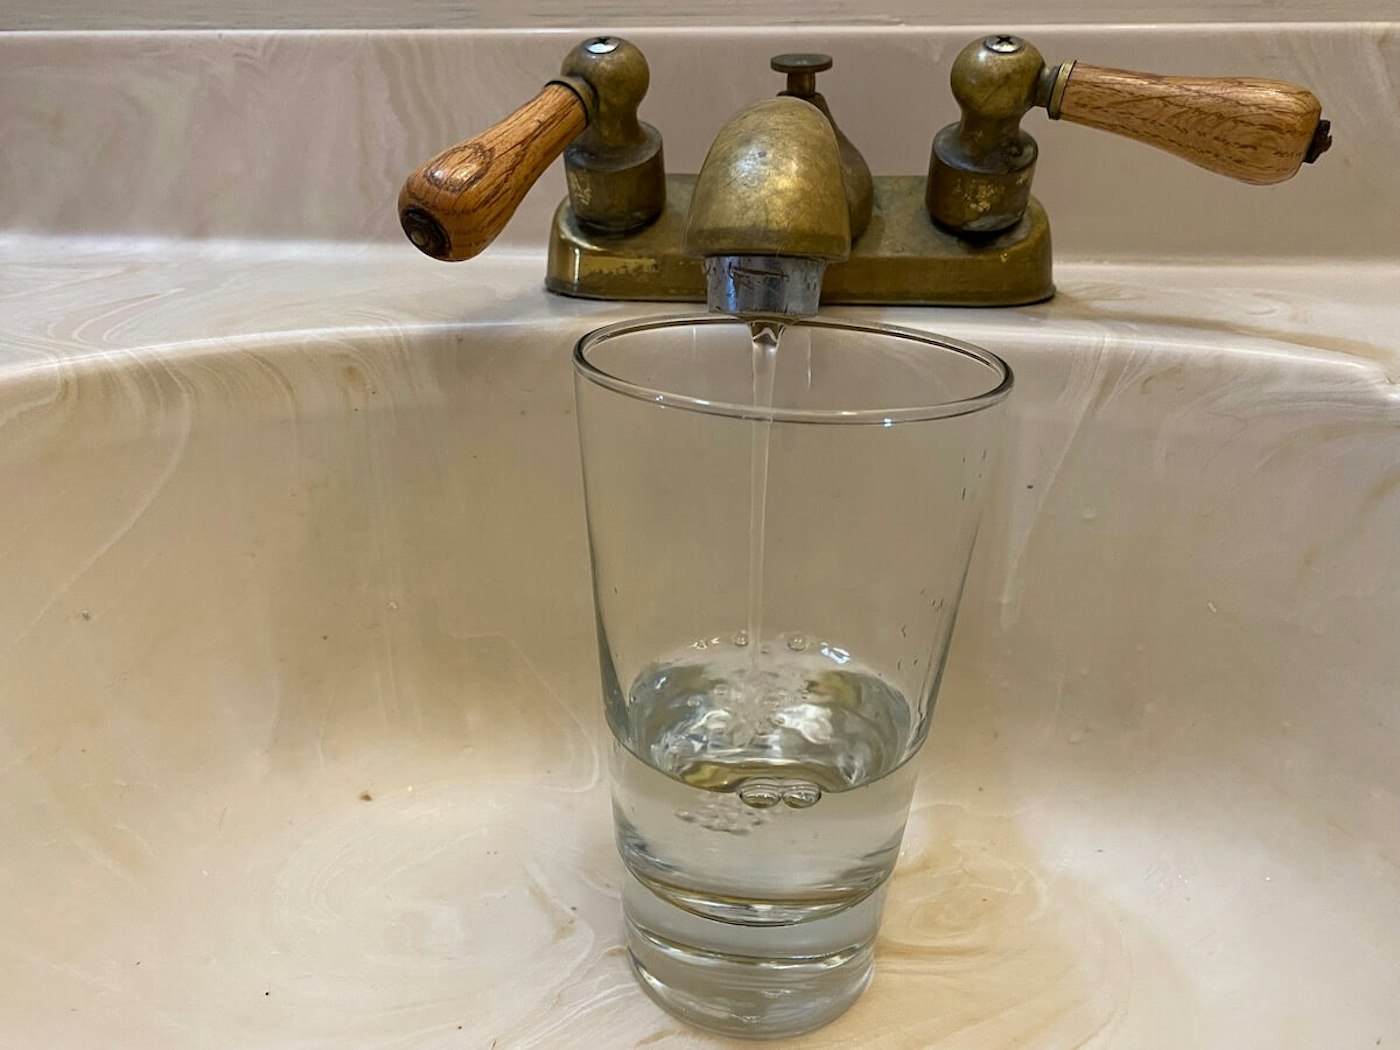 Eau Claire city officials have found excessive PFAS levels in four of the city’s 16 wells that provide city residents with drinking water. The city is among about 70 sites in Wisconsin where PFAS contamination has been discovered. (Photo by Julian Emerson)